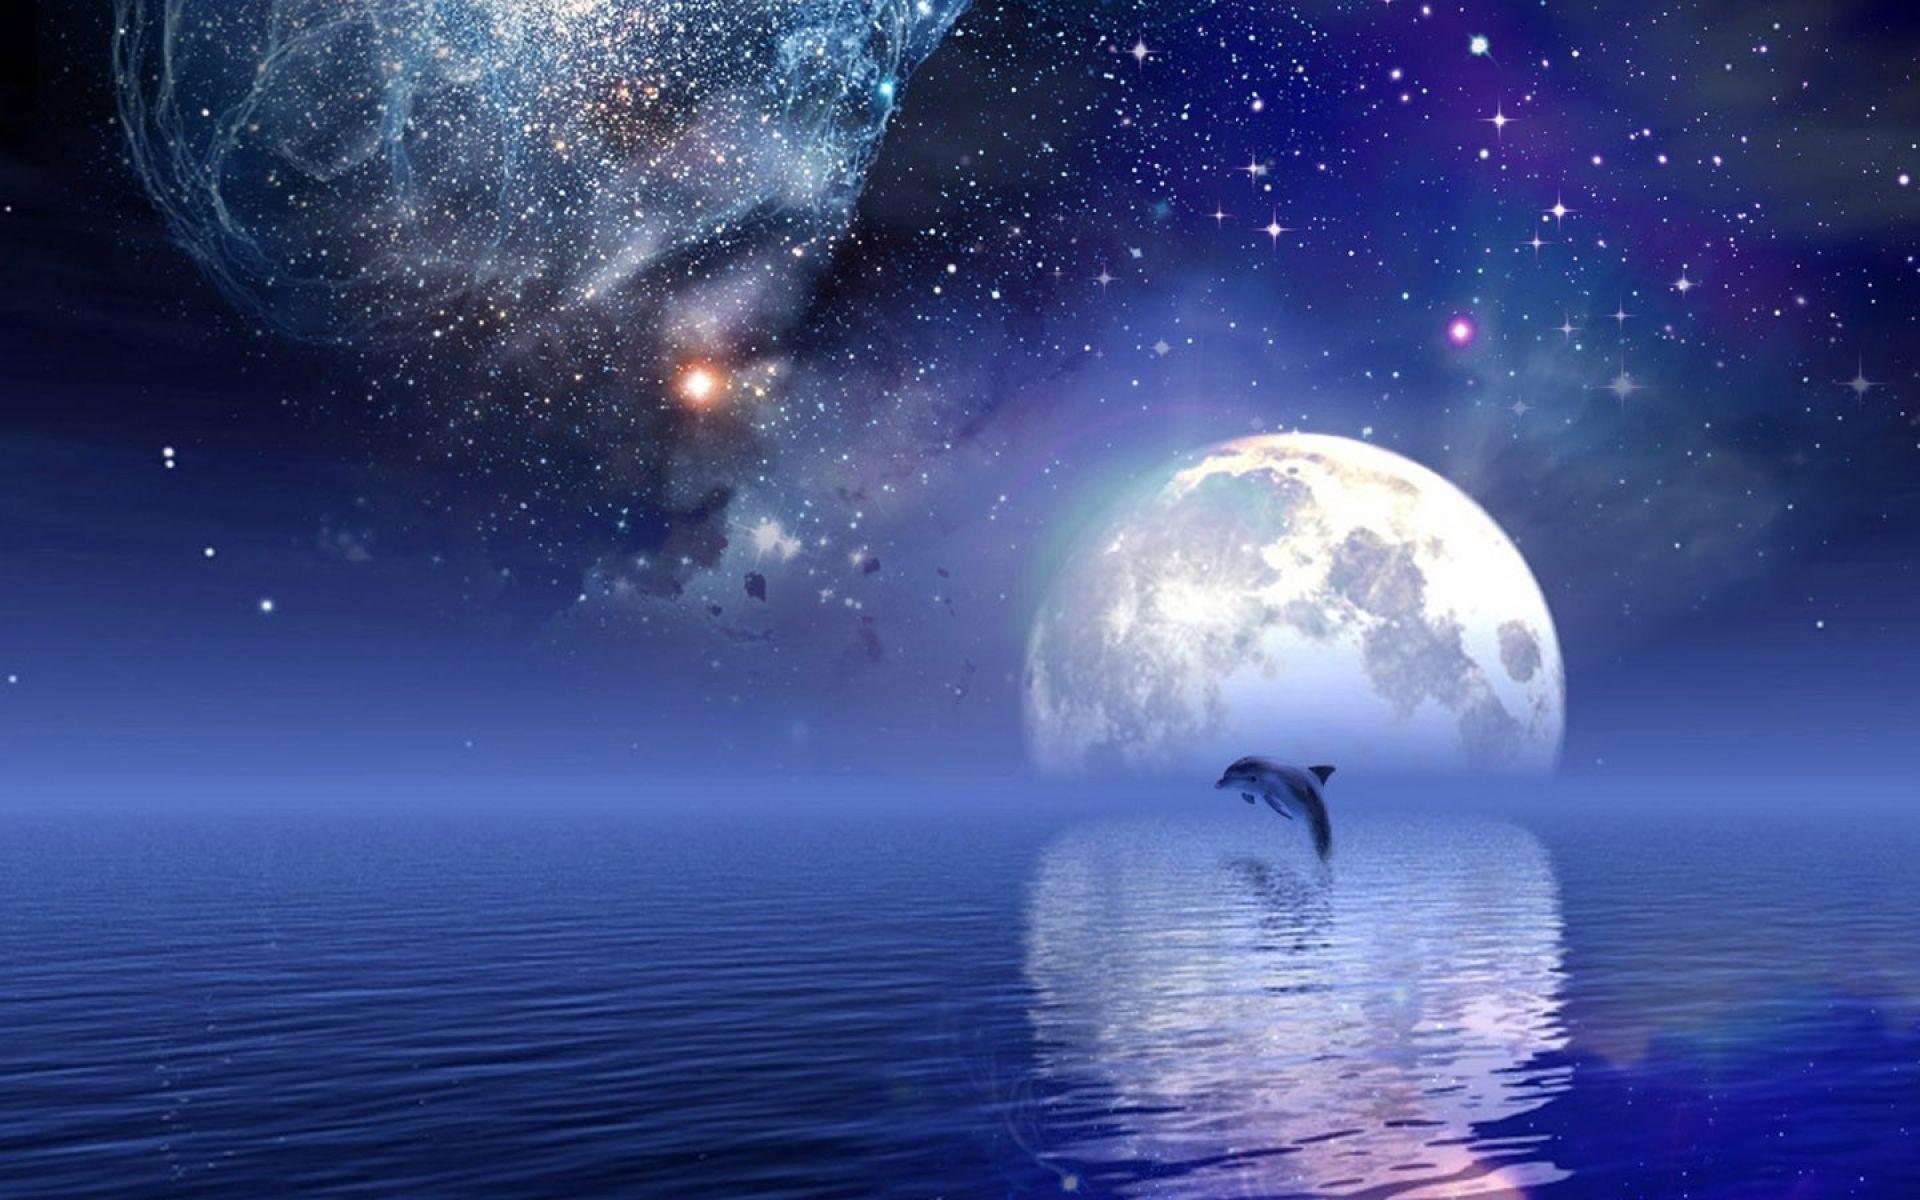 Dolphins Moonlight Lake Wallpaper 1920x1200 px Free Download